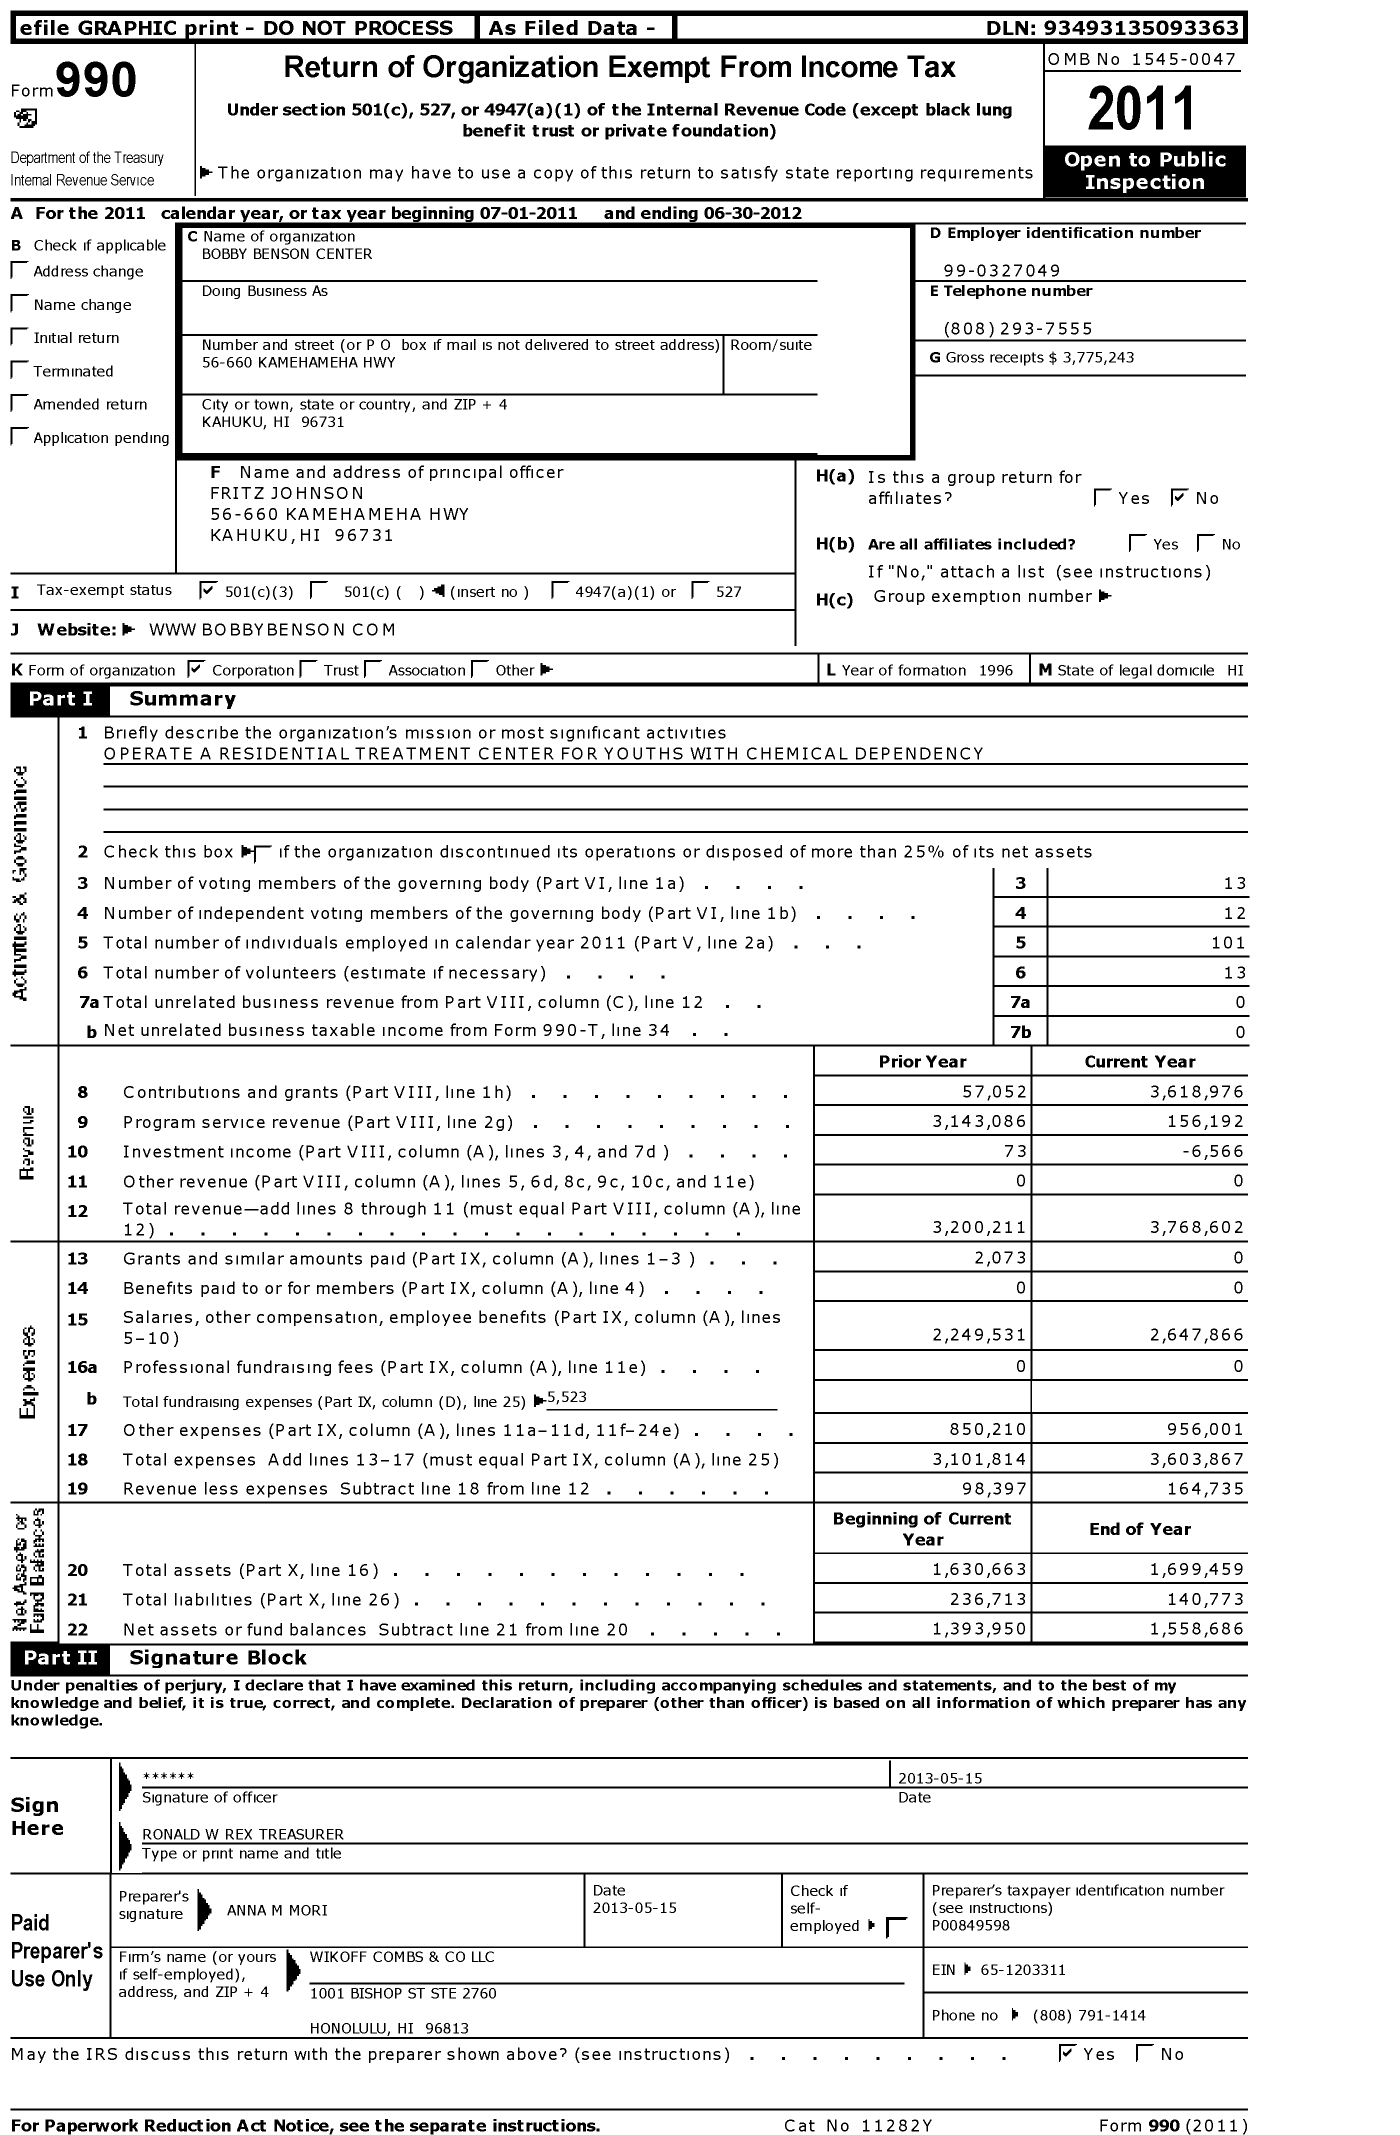 Image of first page of 2011 Form 990 for Bobby Benson Center (BBC)